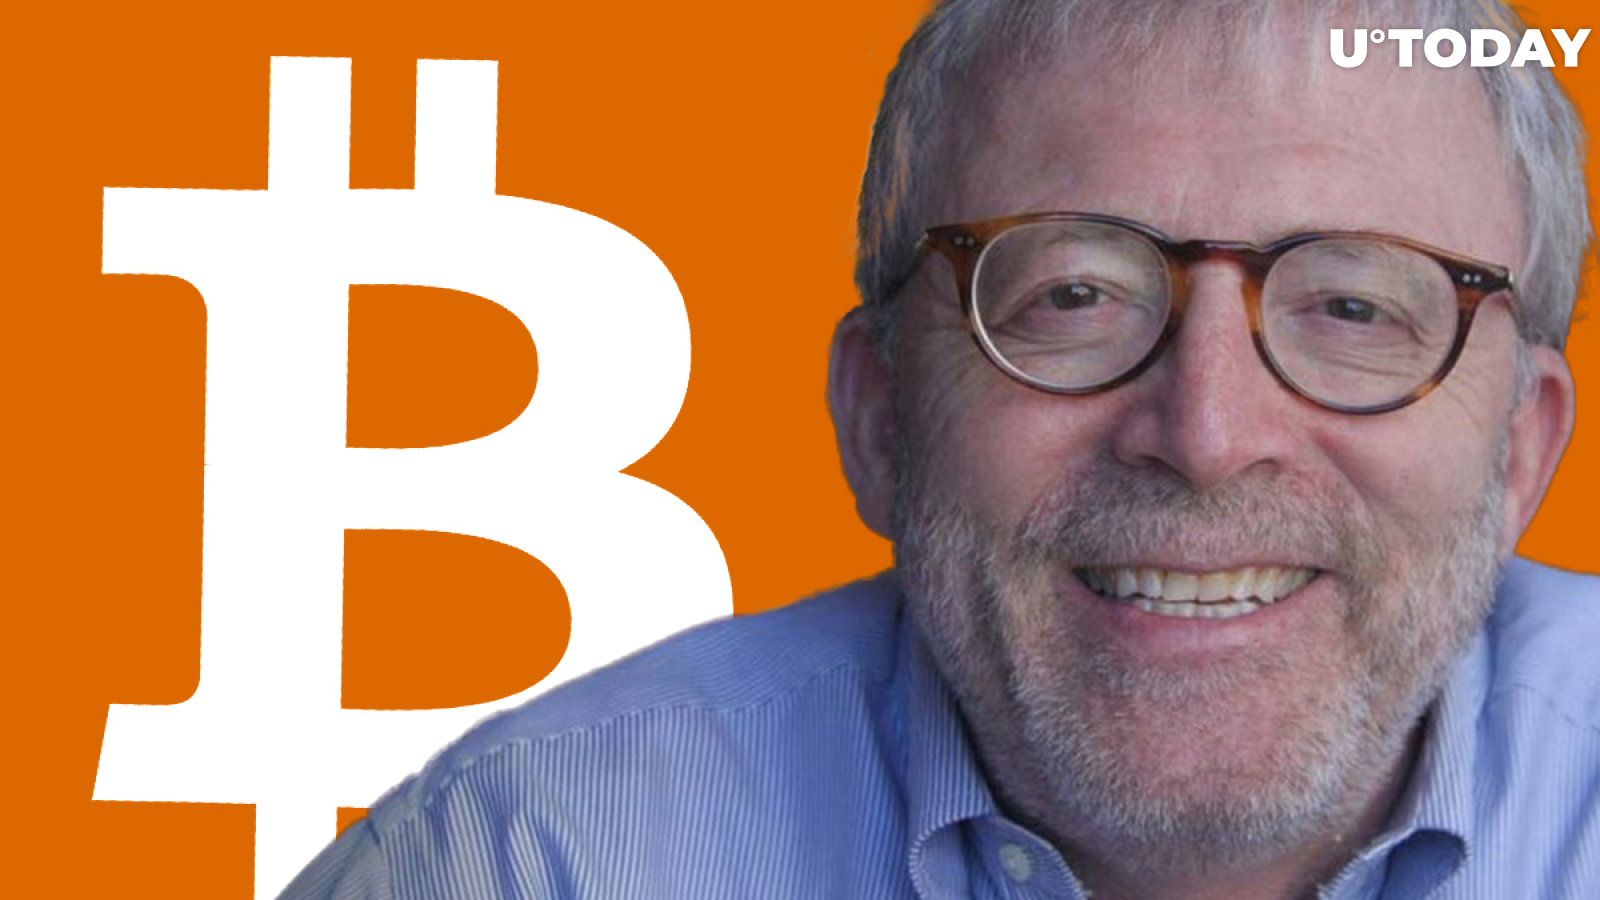 Peter Brandt: "Bitcoin Is the Wrong Way to Find Value in Life"